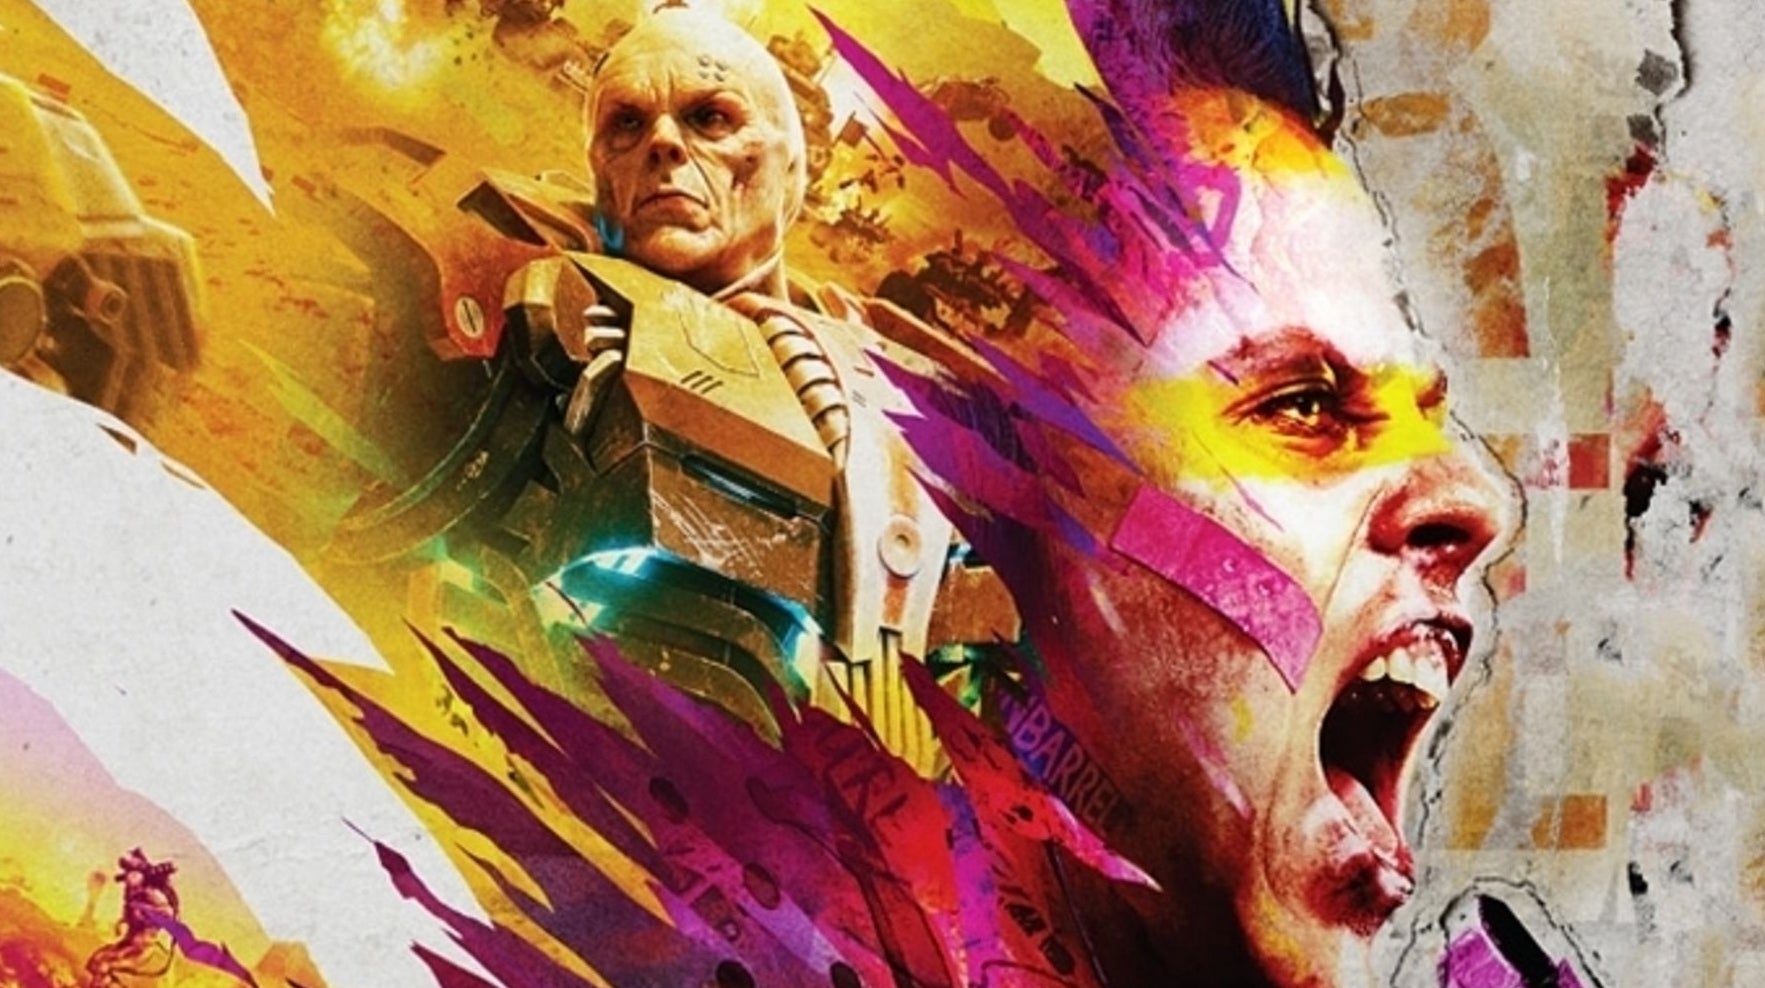 Image for Rage 2 tech analysis: is 1080p60 the best use for Xbox One X and PS4 Pro?